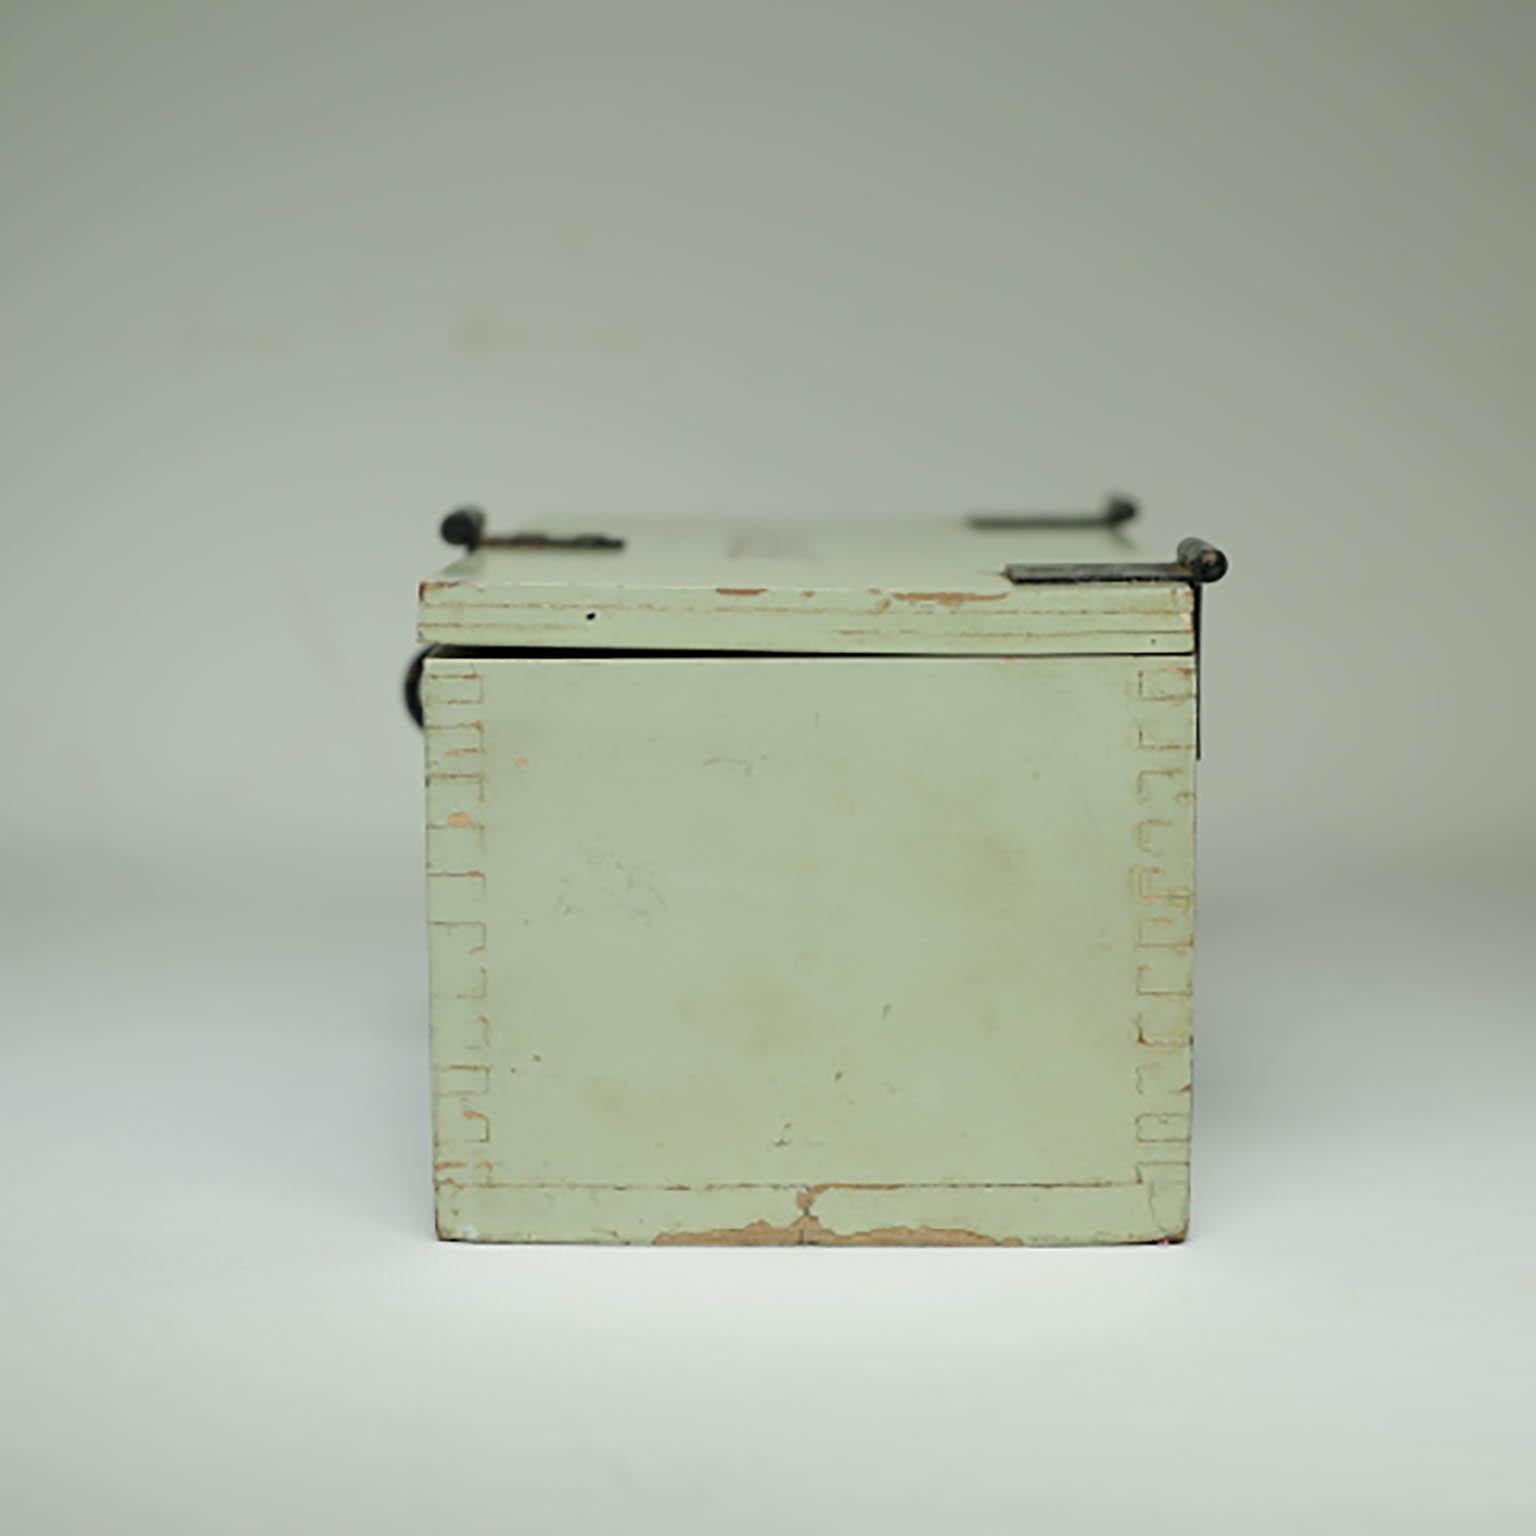 Pale green keepsake box with steel latch, hinges and handle on the other side. Monogramed on the top. Possibly a military box used in WWII.